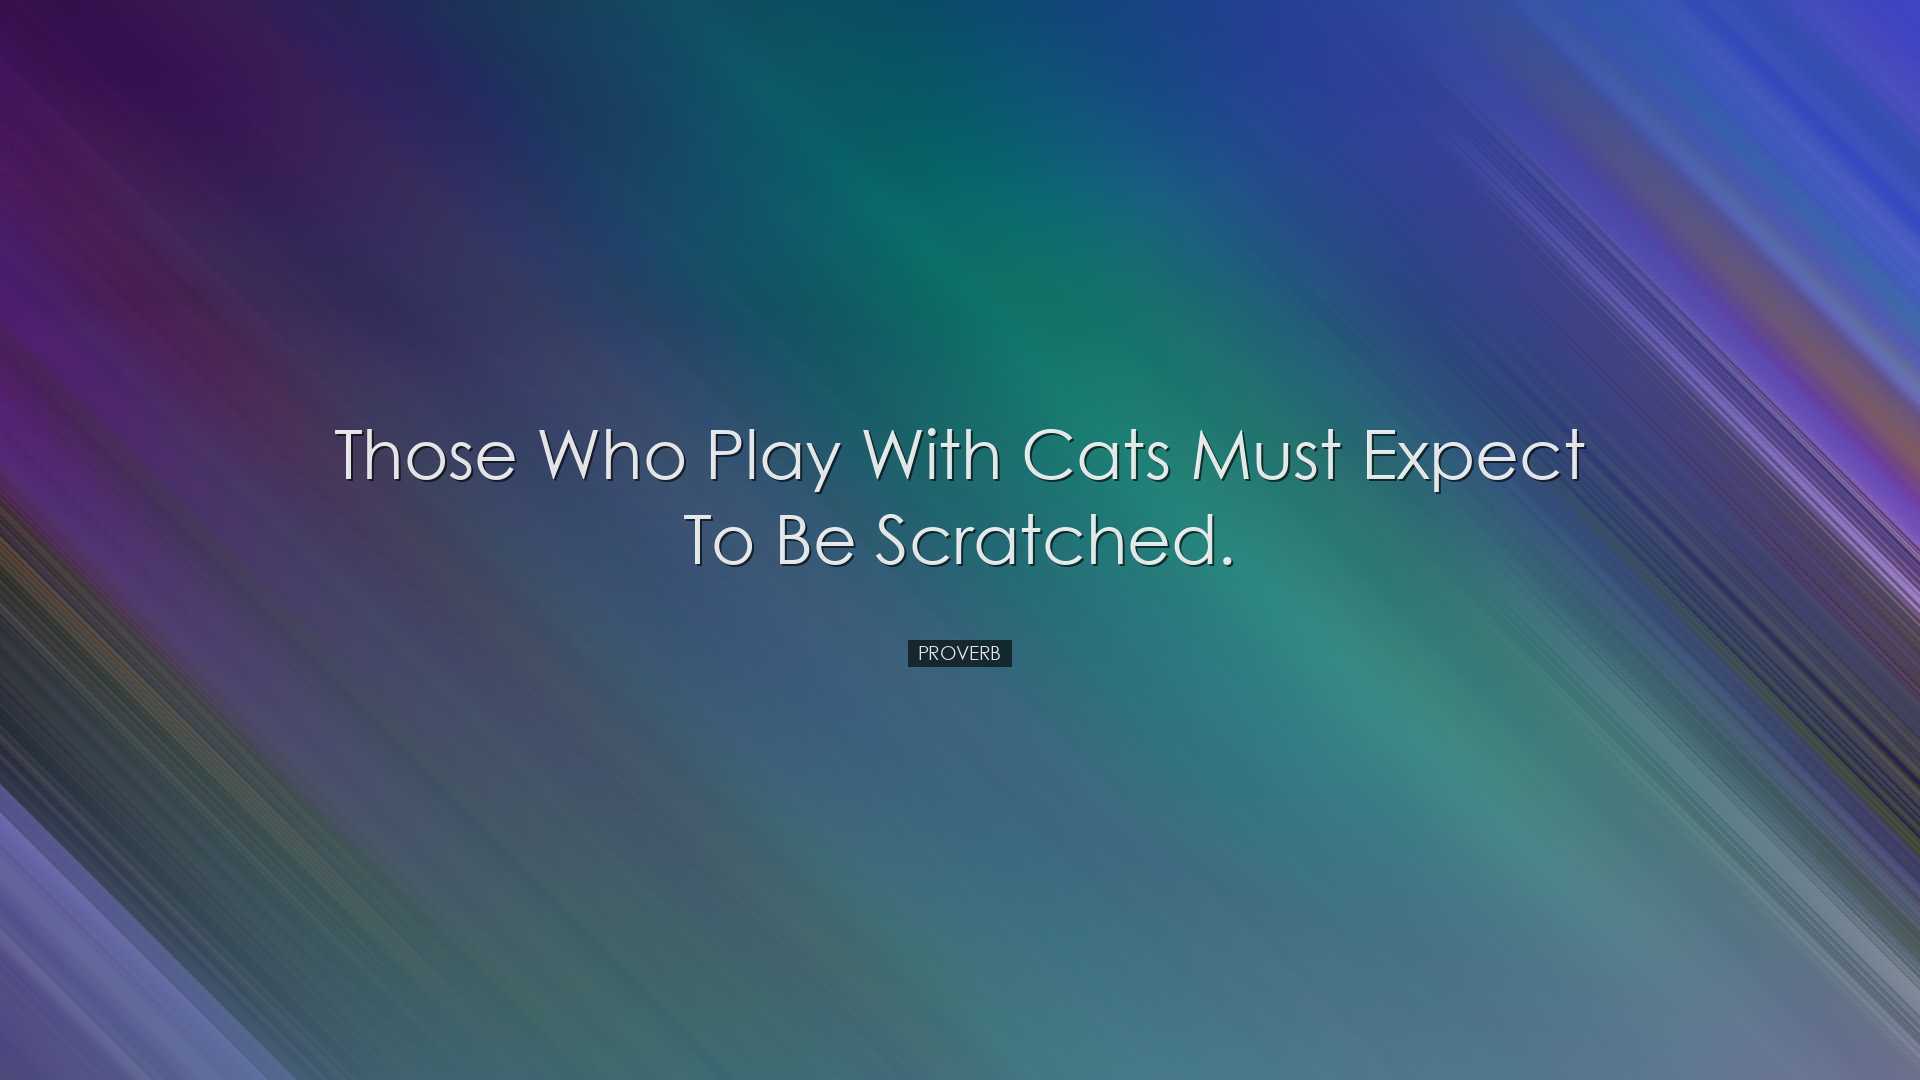 Those who play with cats must expect to be scratched. - Proverb